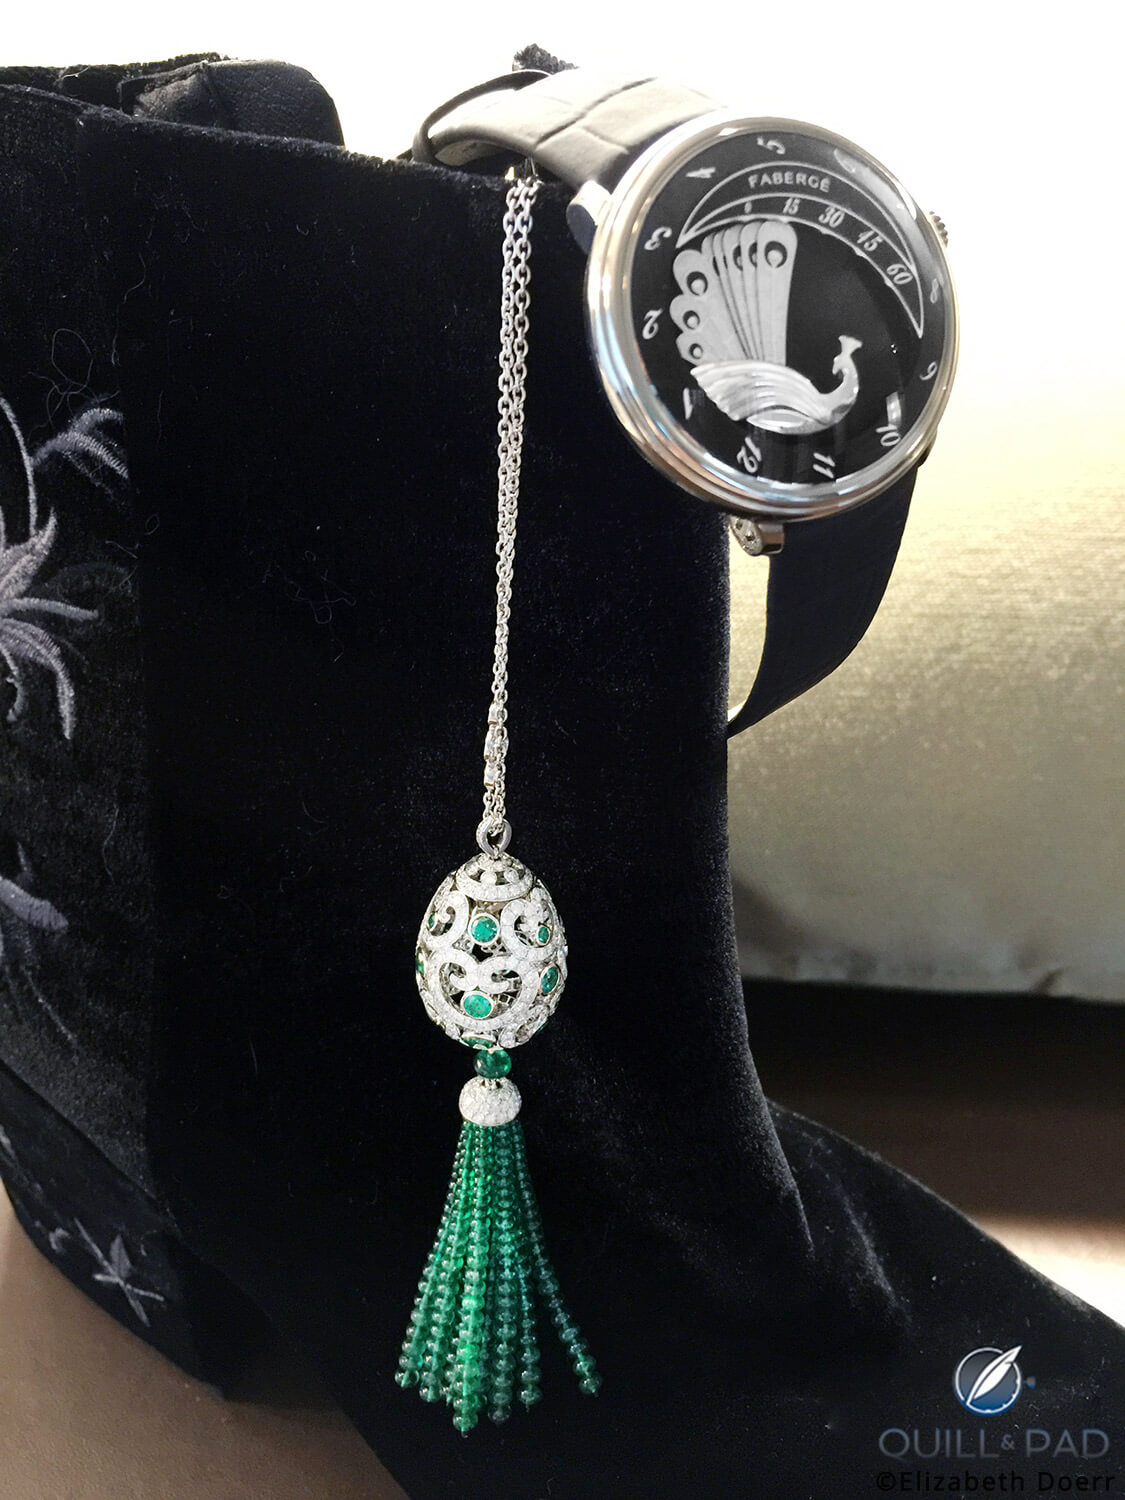 Fabergé Imperatrice Emerald Tassel Pendant and Lady Compliquee Peacock Black watch